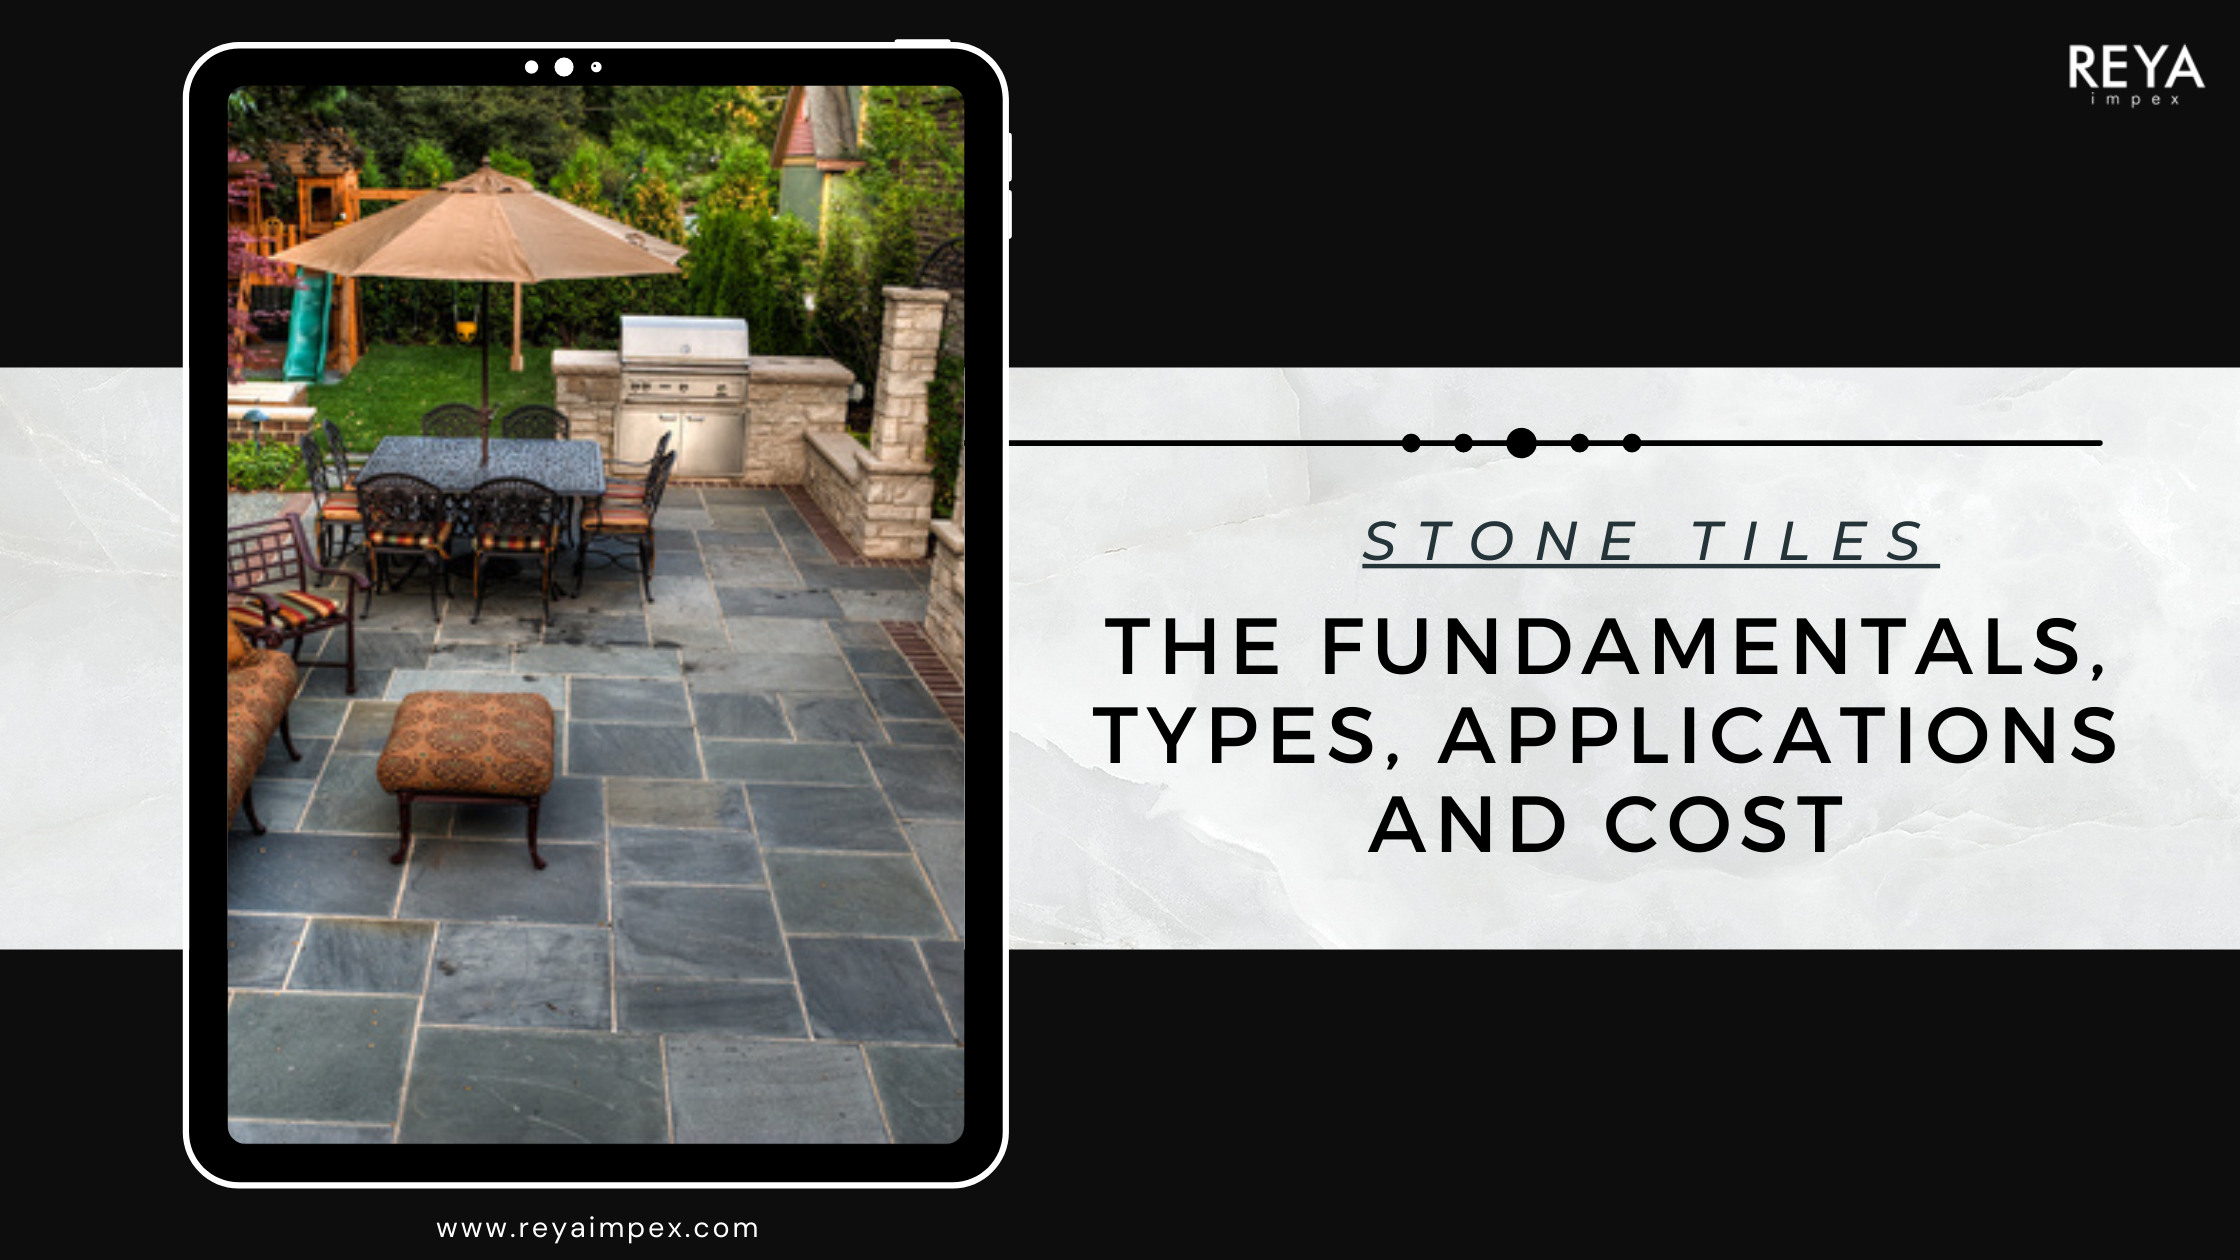 Stone Tiles - The Fundamentals, Types, Applications and Cost